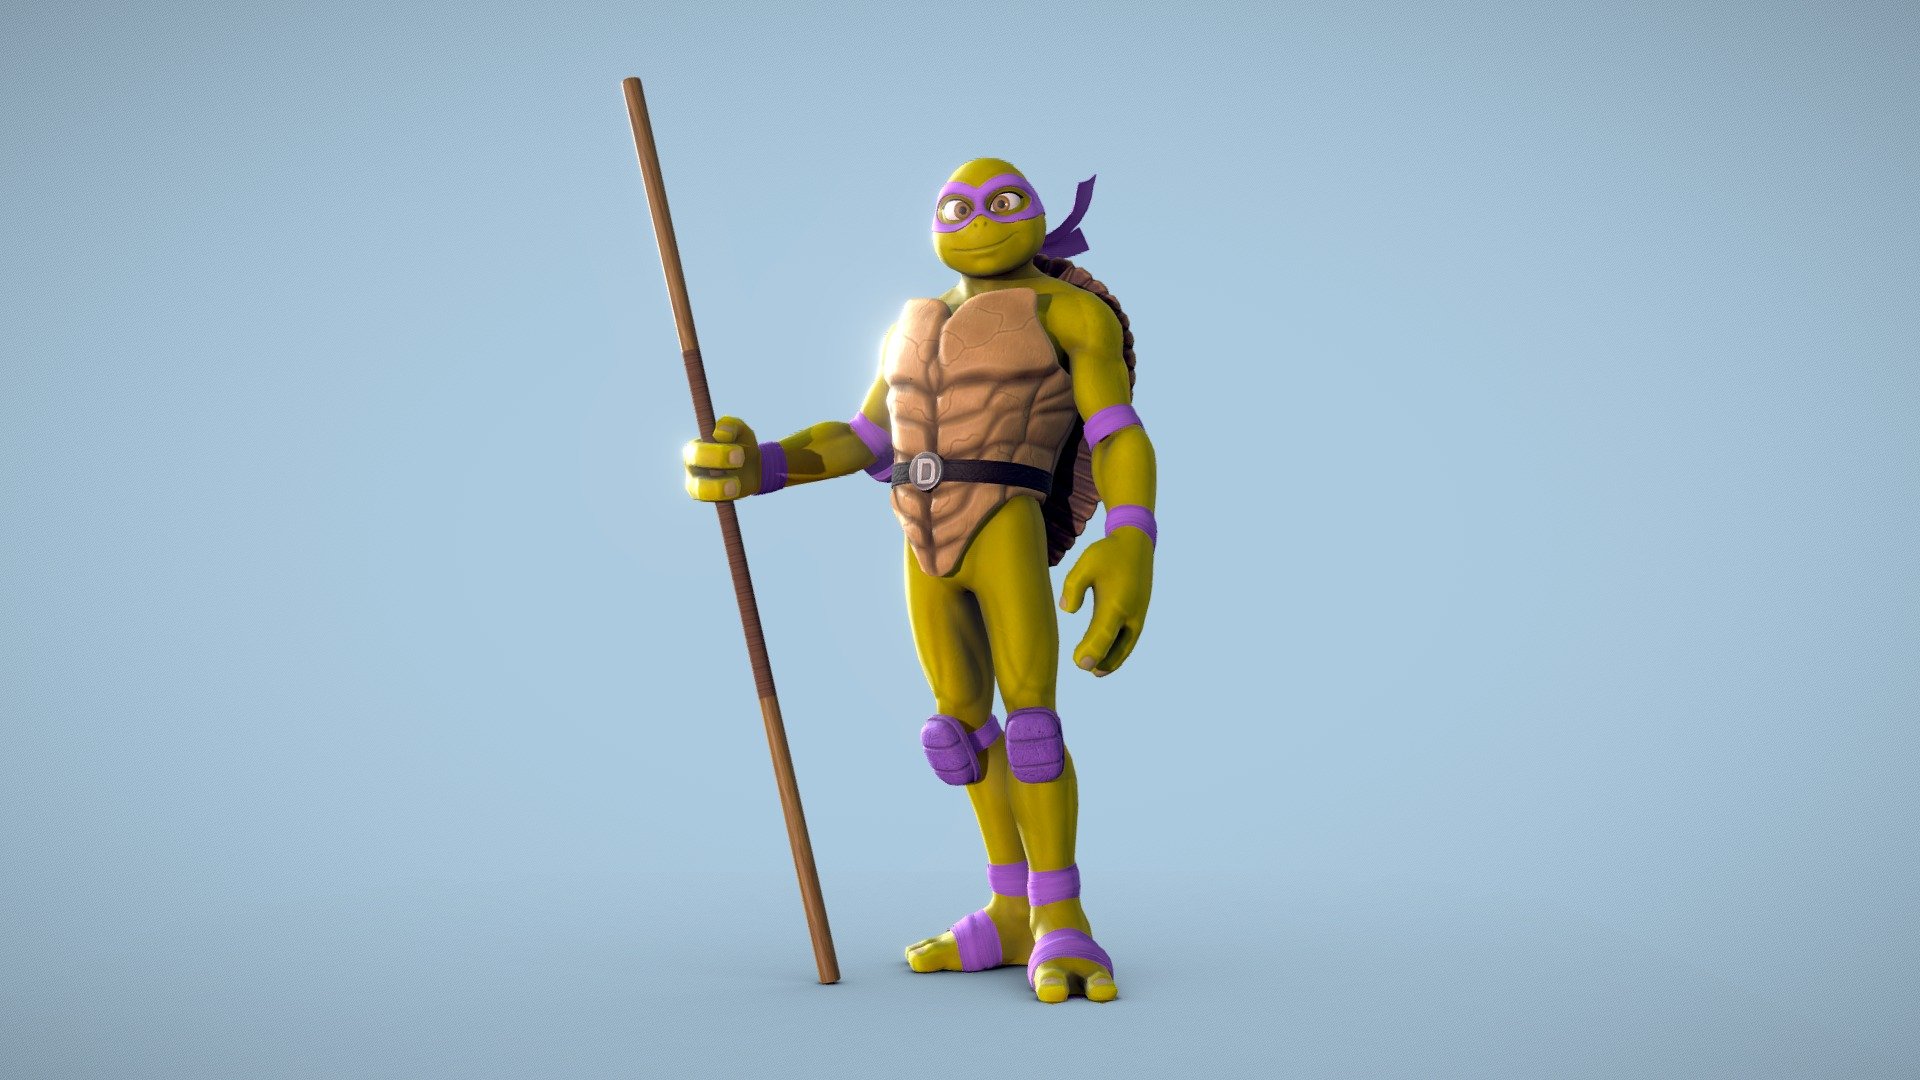 Donatello from the TMNT universe updated to my own stylized style.

Take a look of the Teenage mutant ninja turtles collection.

This model includes an A-pose version to get rigged and the High poly version of the body 3d model